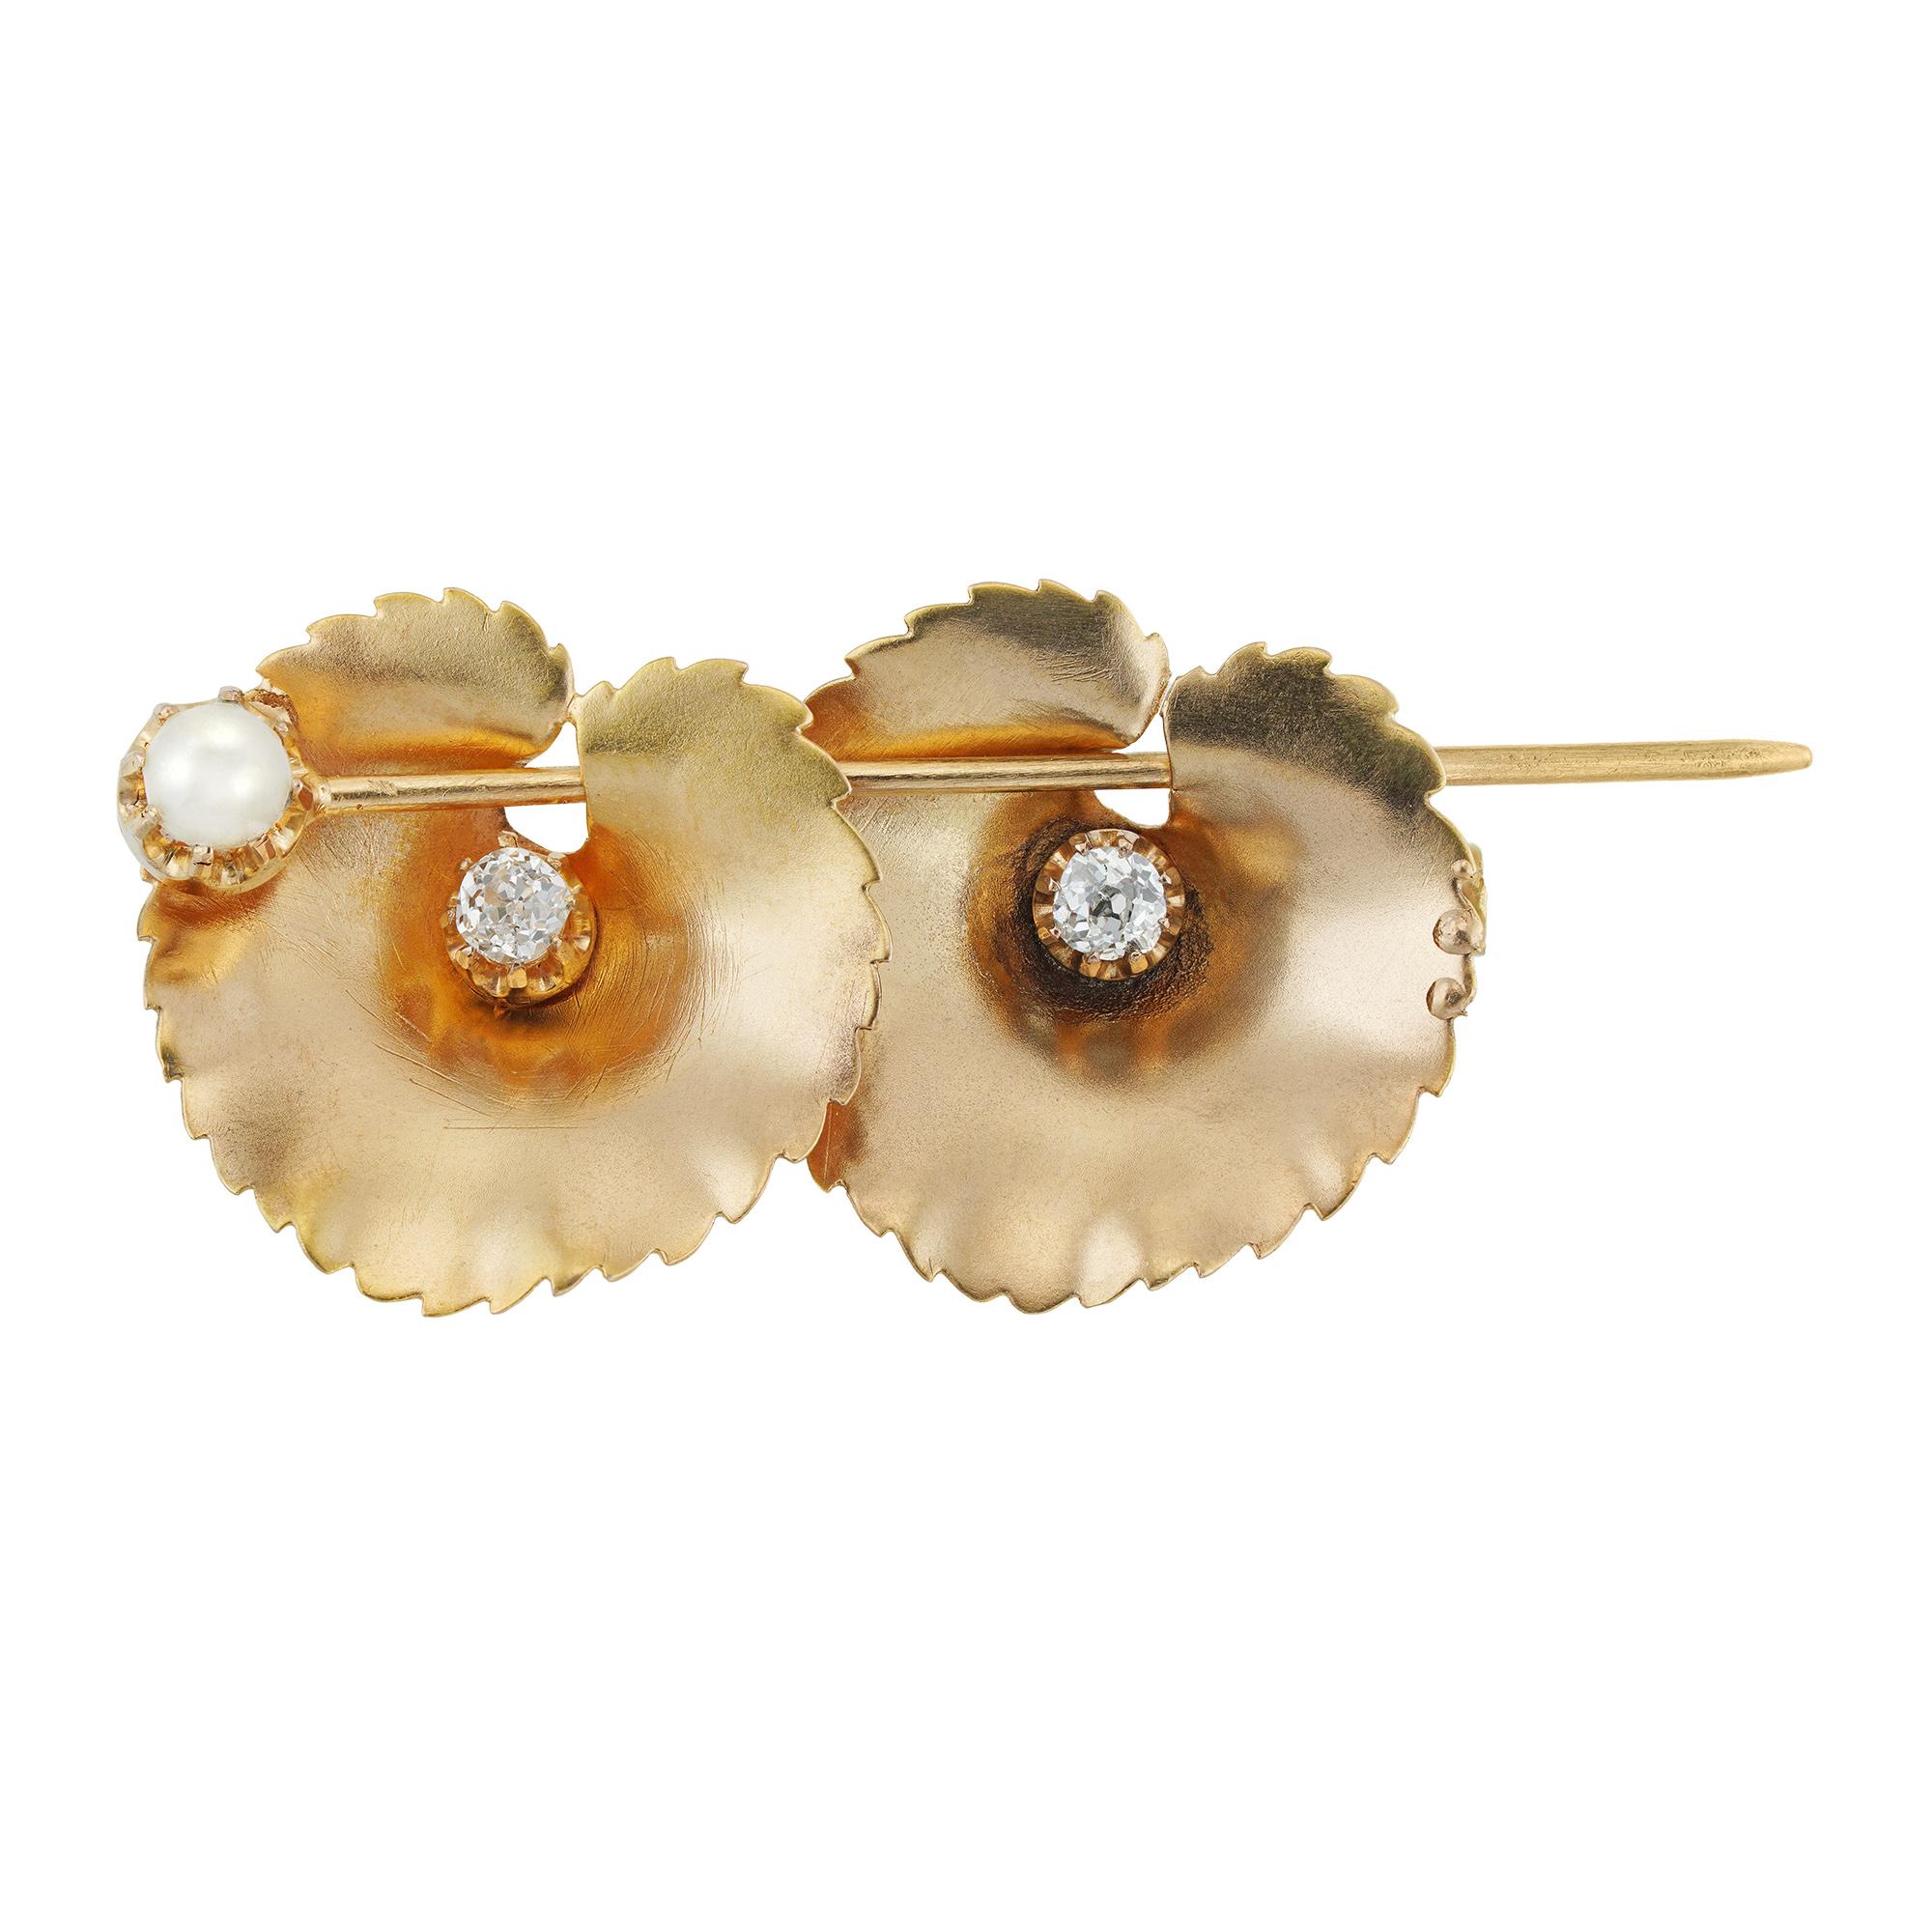 A French double lillypad brooch, the gold carved lillypads set with old brilliant-cut diamonds pierced by a gold bar decorated with a pearl, circa 1900, measuring approximately 4.7x2cm gross weight 6.0 grams.

This lovely antique turn of the century